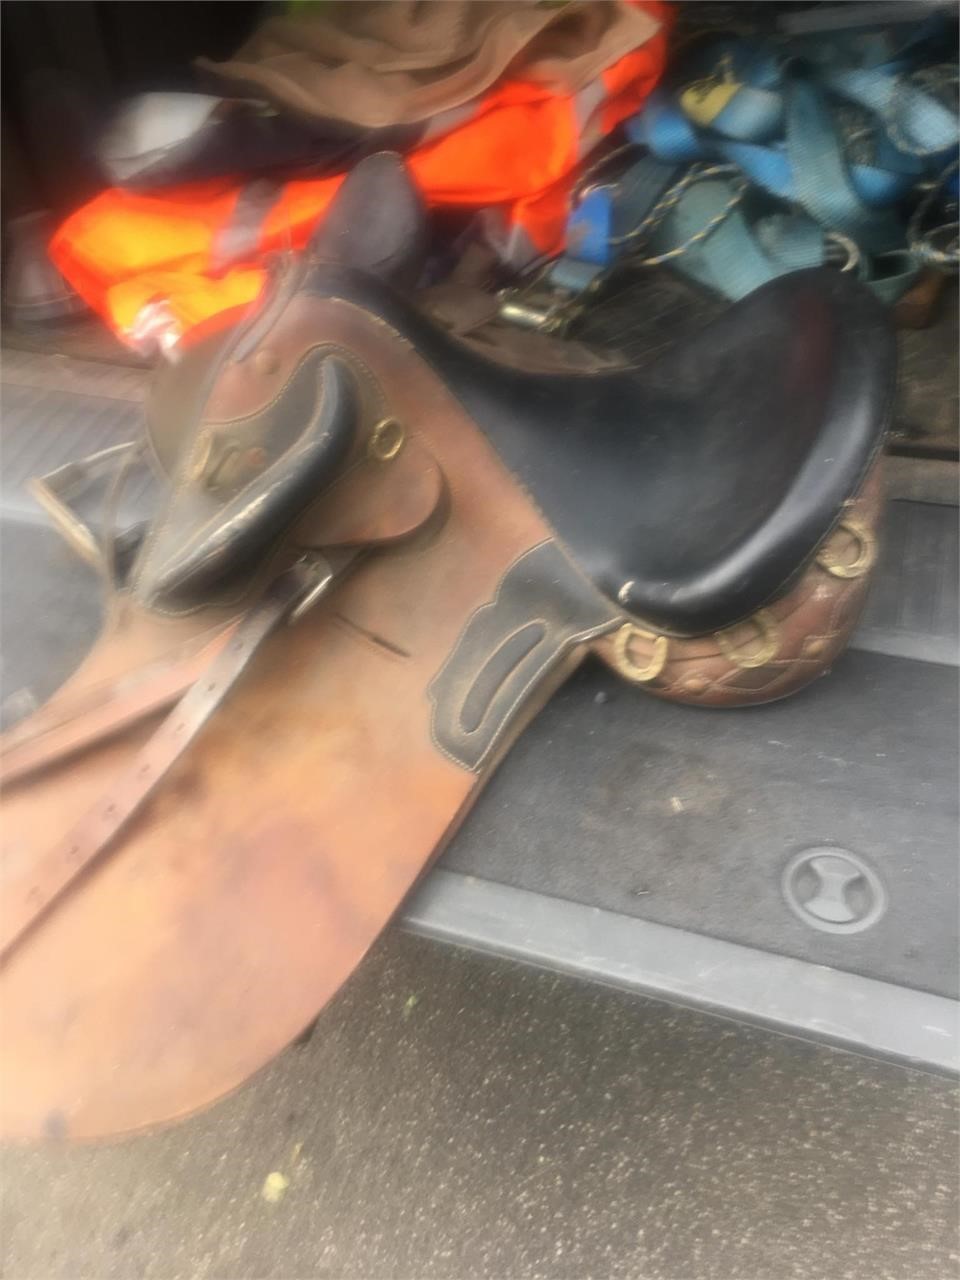 (Private) MARSHAL POLEY SADDLE